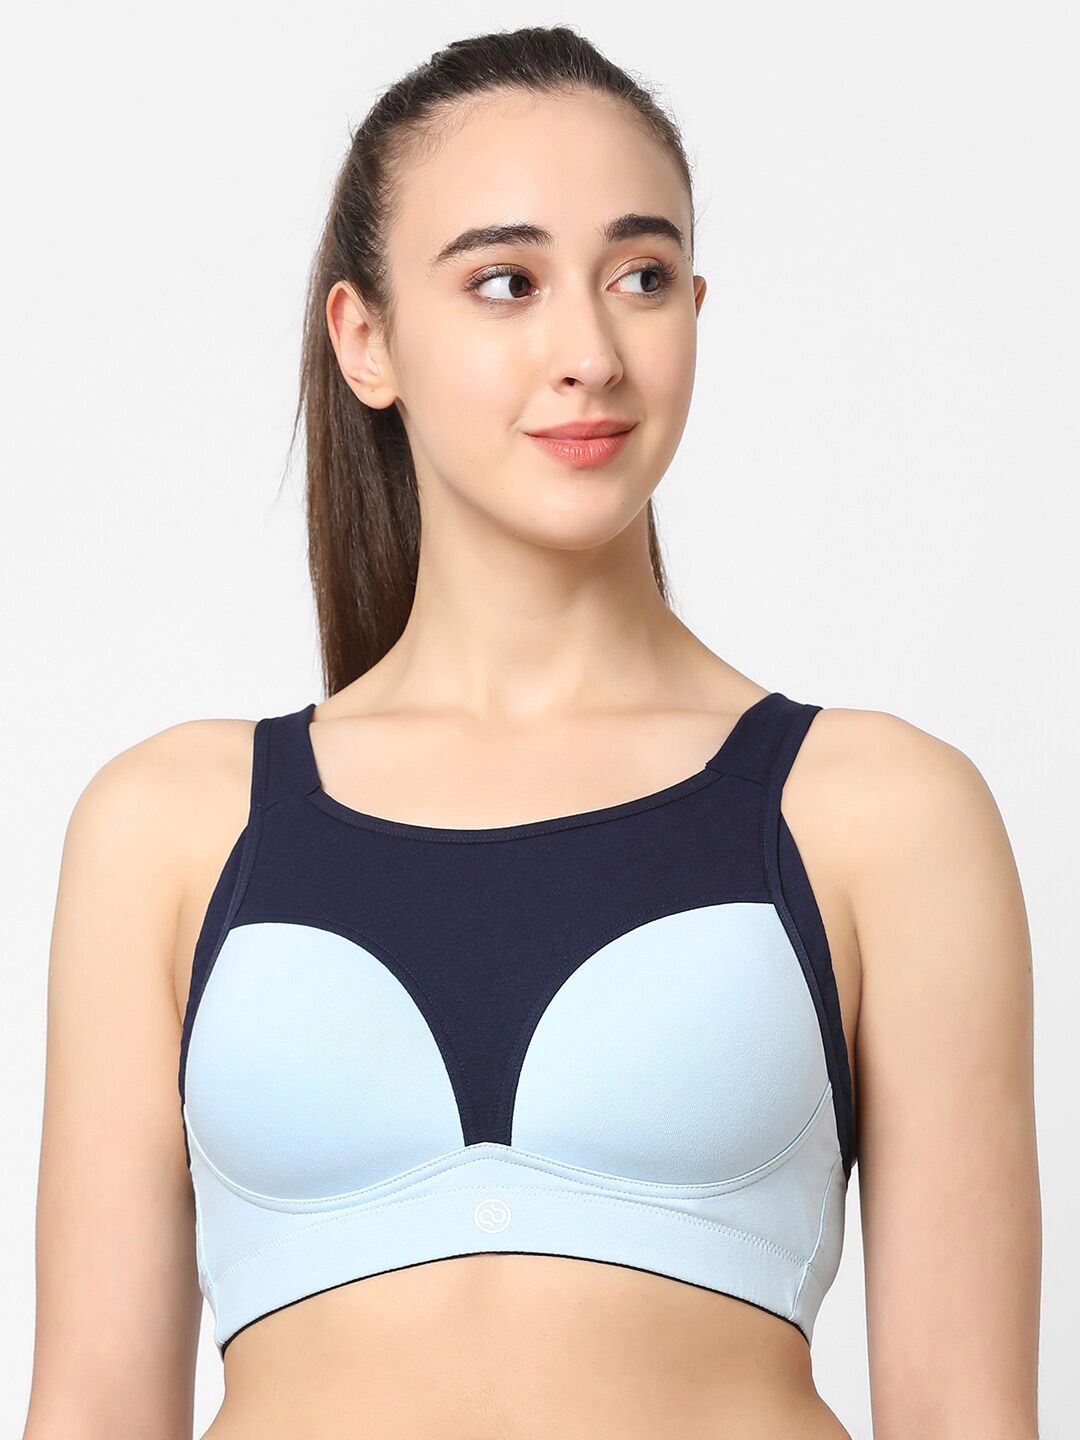 Soie Blue & Black Colourblocked Workout Bra Lightly Padded CB-905ASURF Price in India